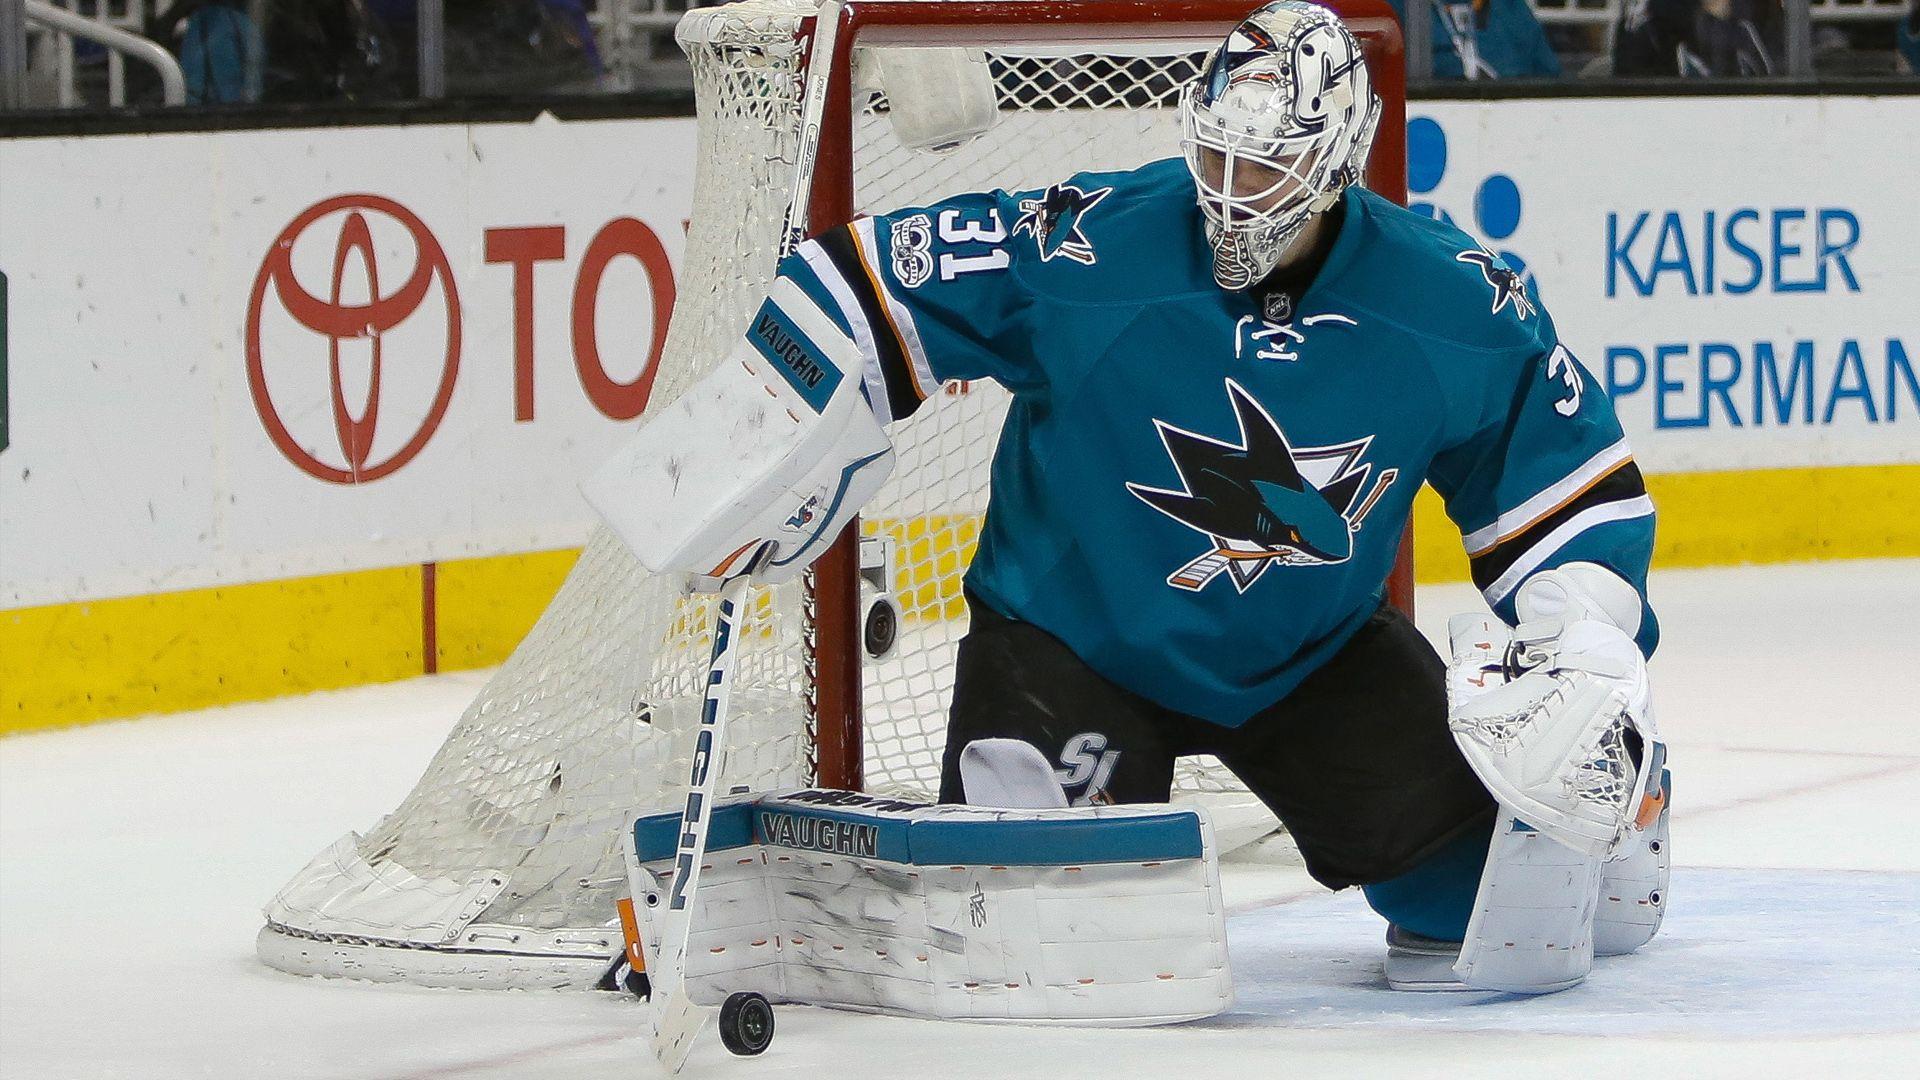 Jones' workload to increase again as Sharks approach playoffs